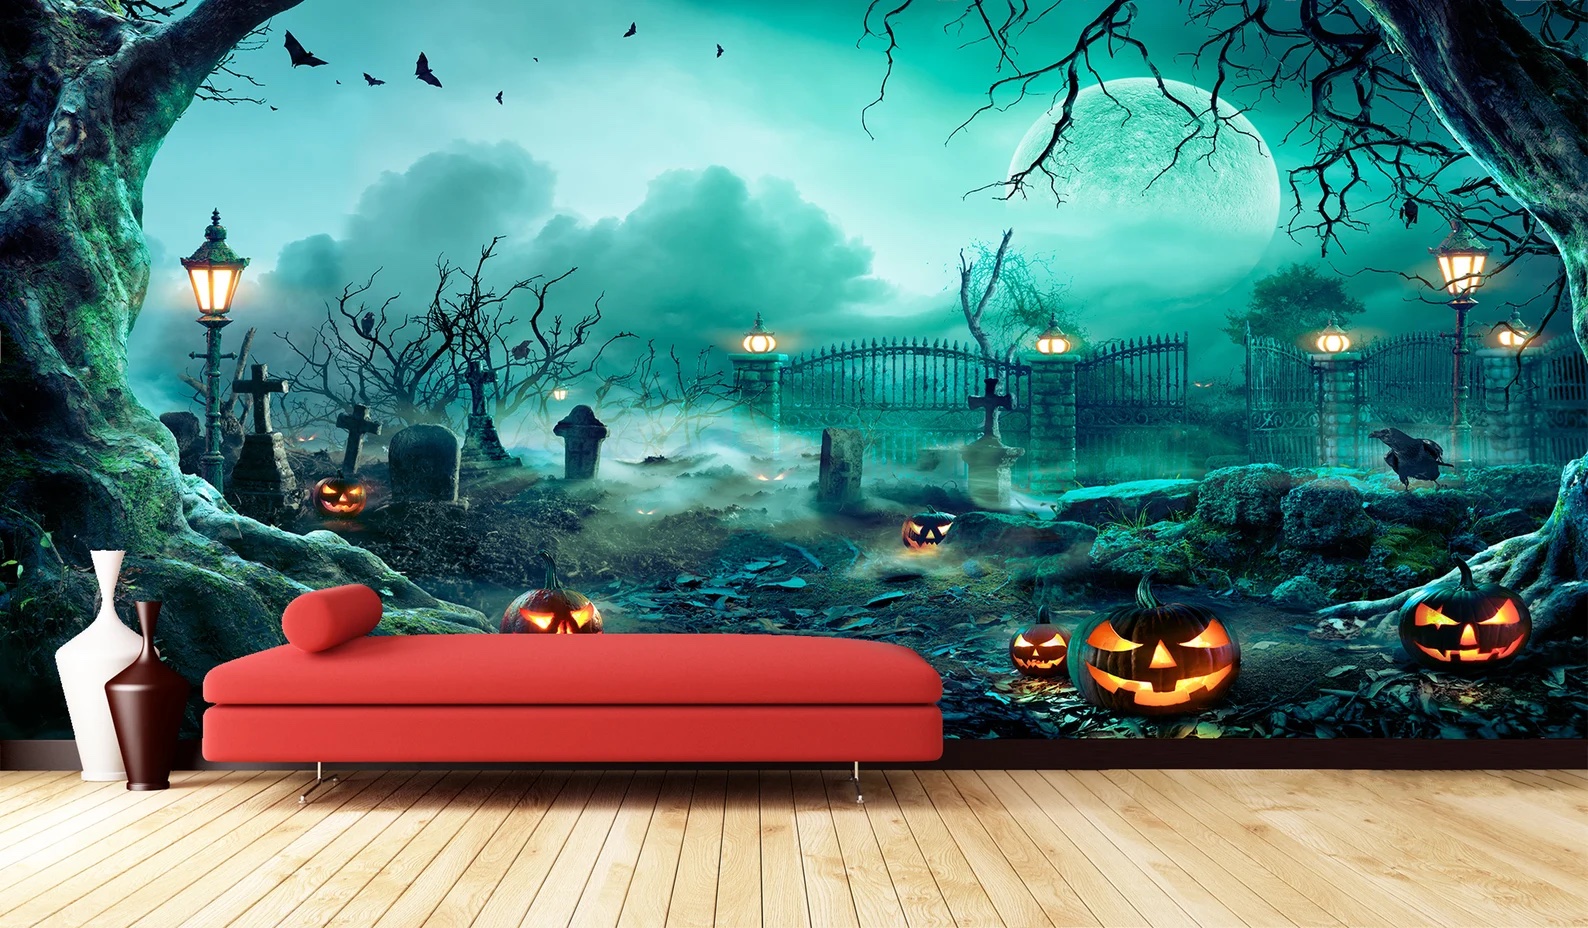 5 Removable Wall Murals to Wow Your Halloween Party Guests